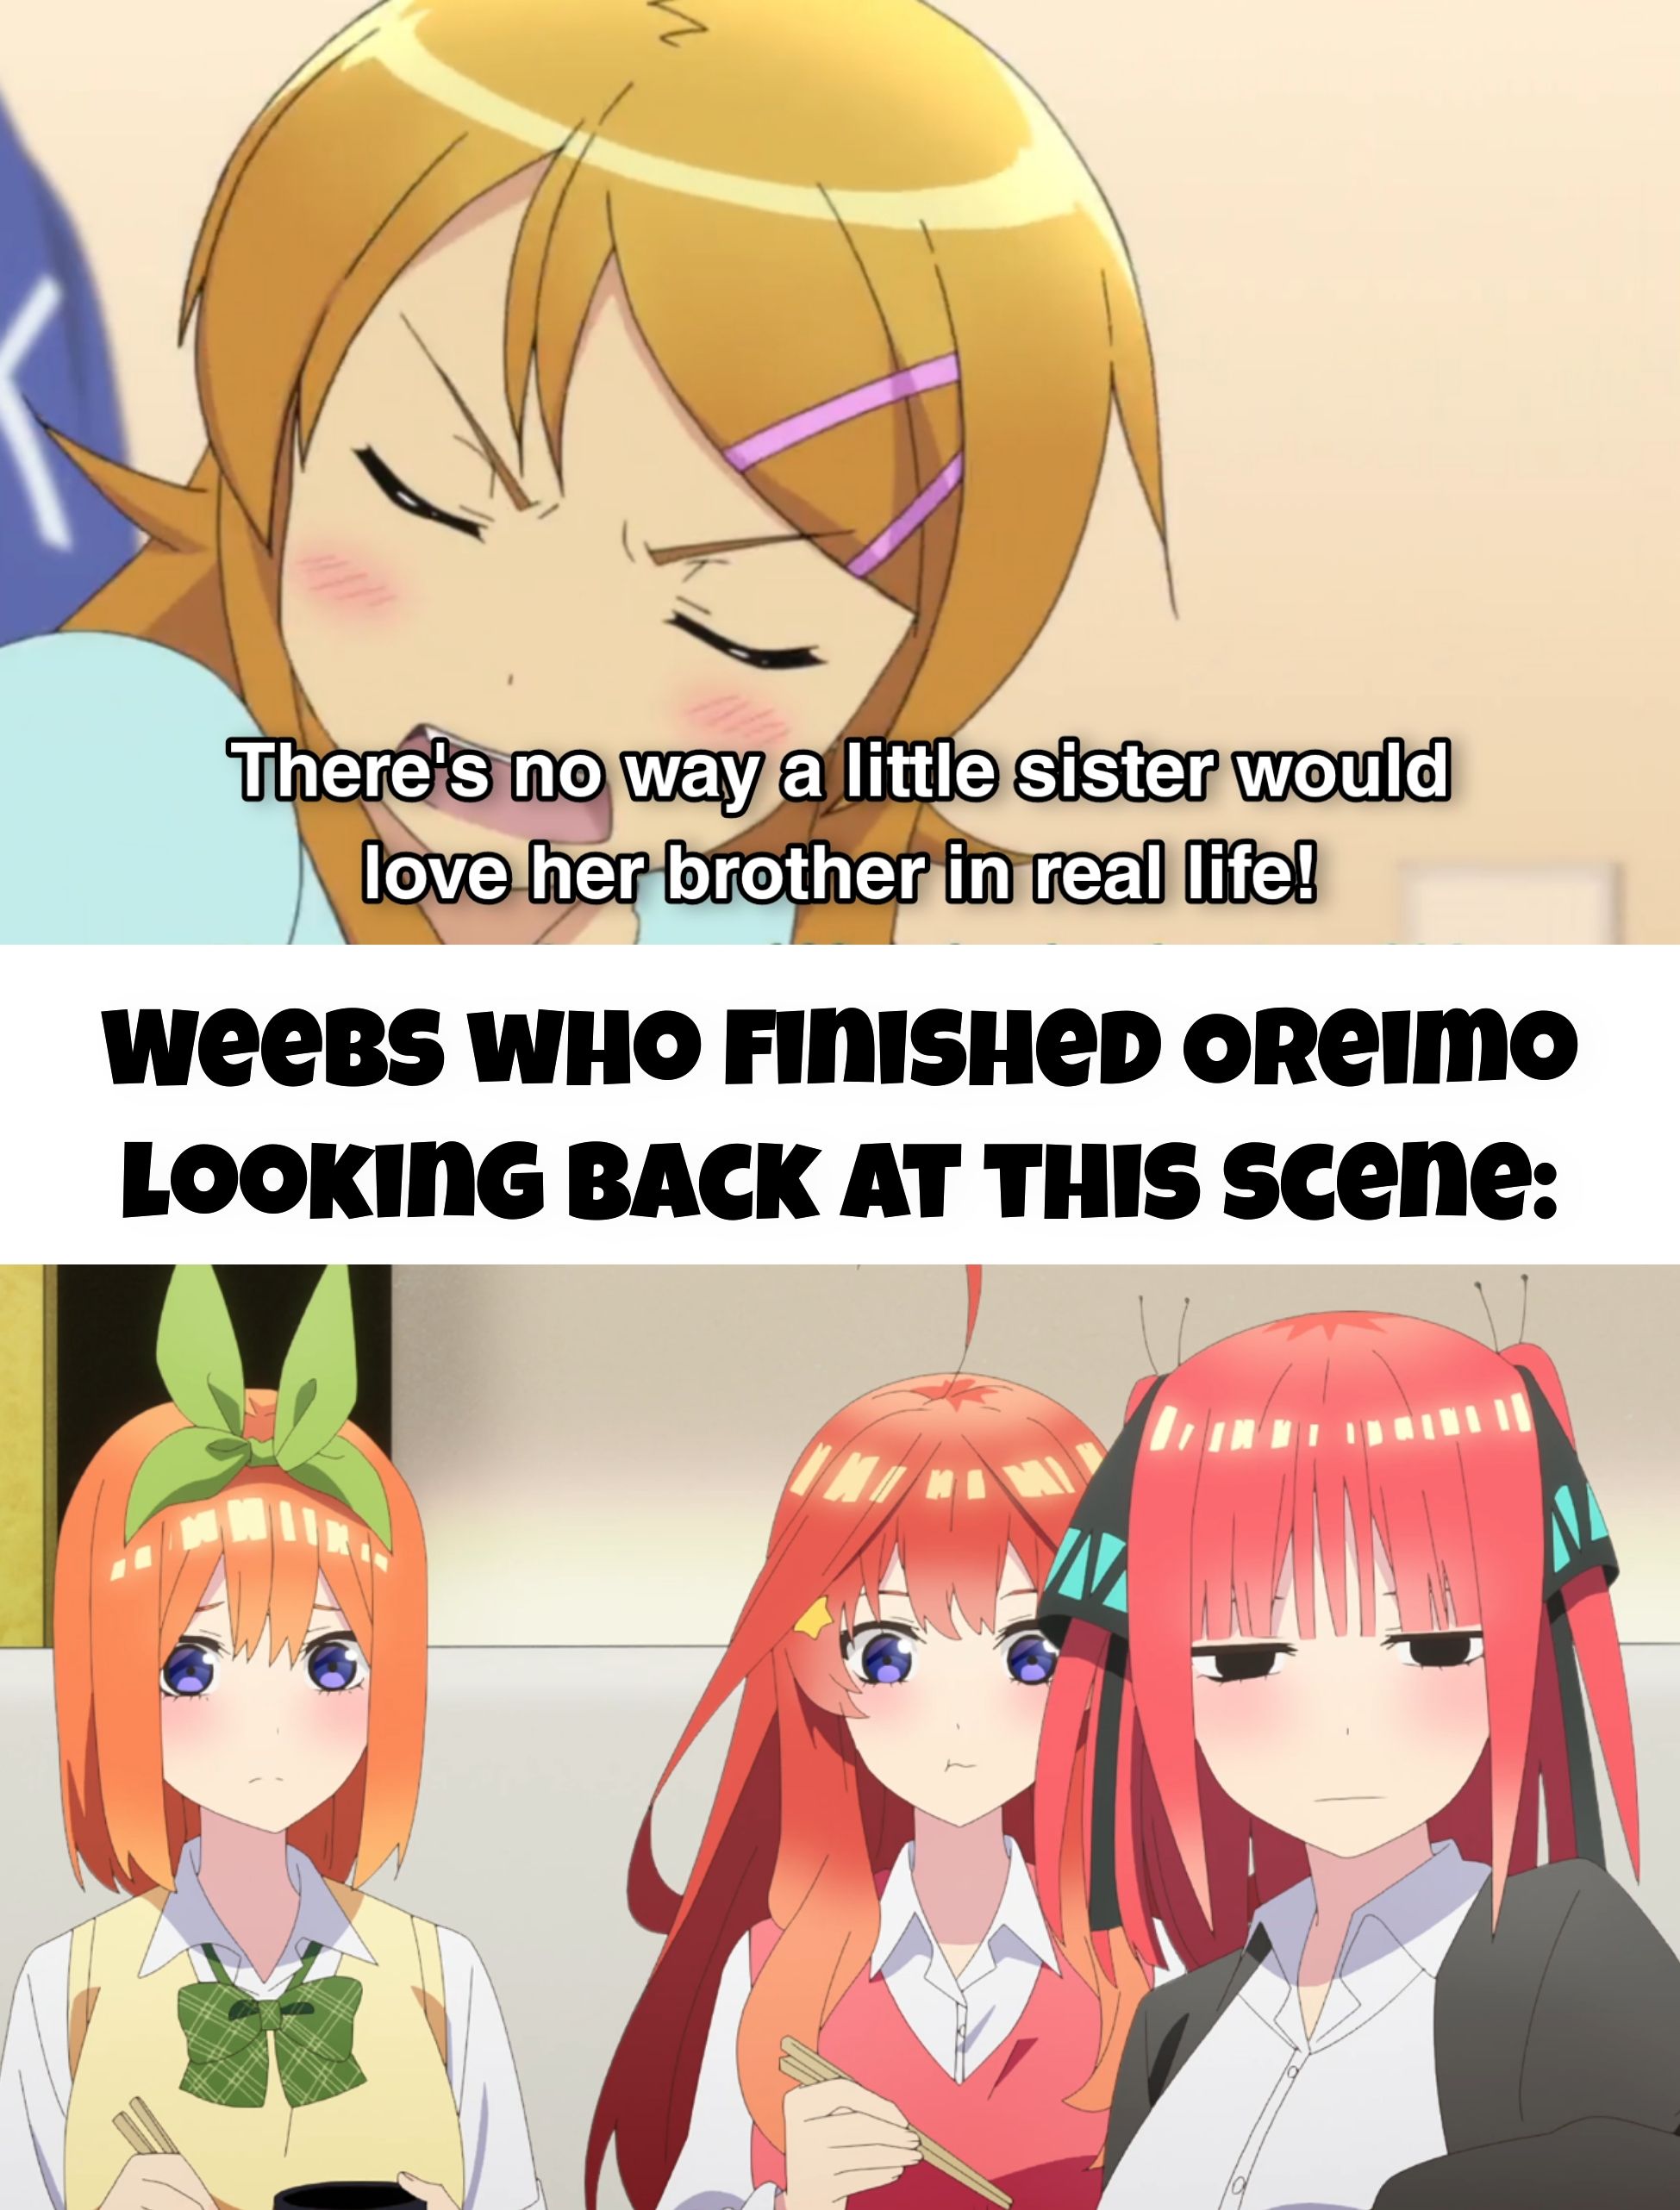 Yeah, Kirino. There's no doubt about it